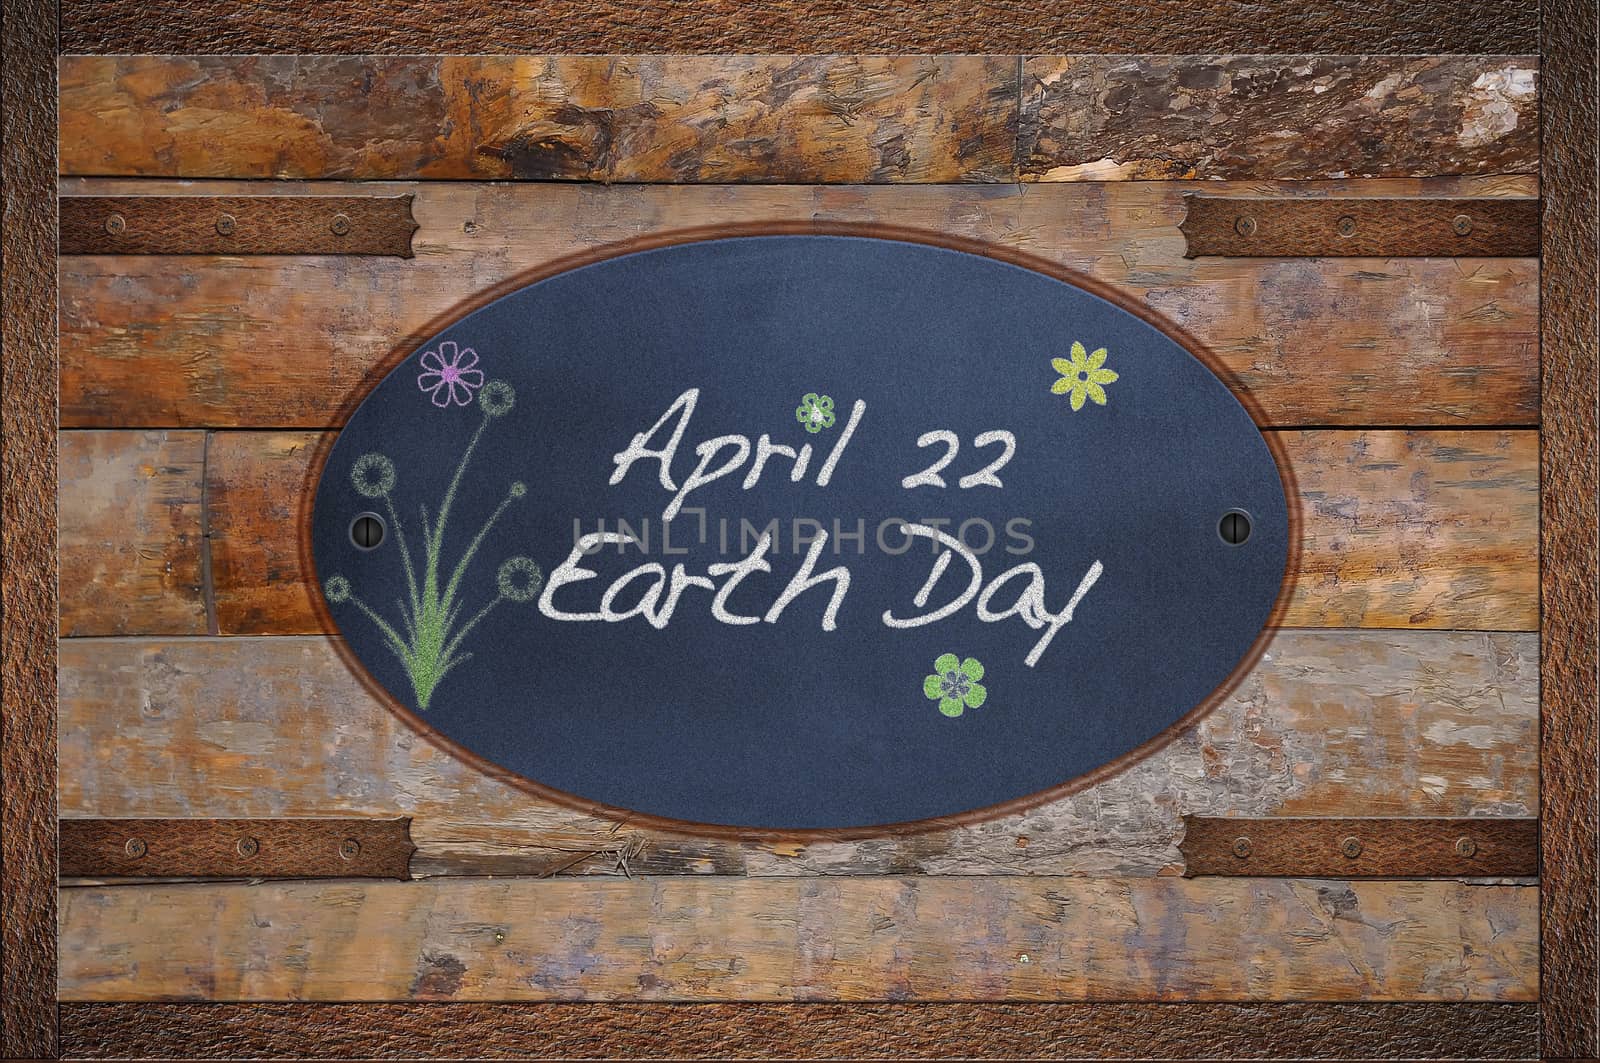 Bulletin board made in wood and blackboard with Earth Day.